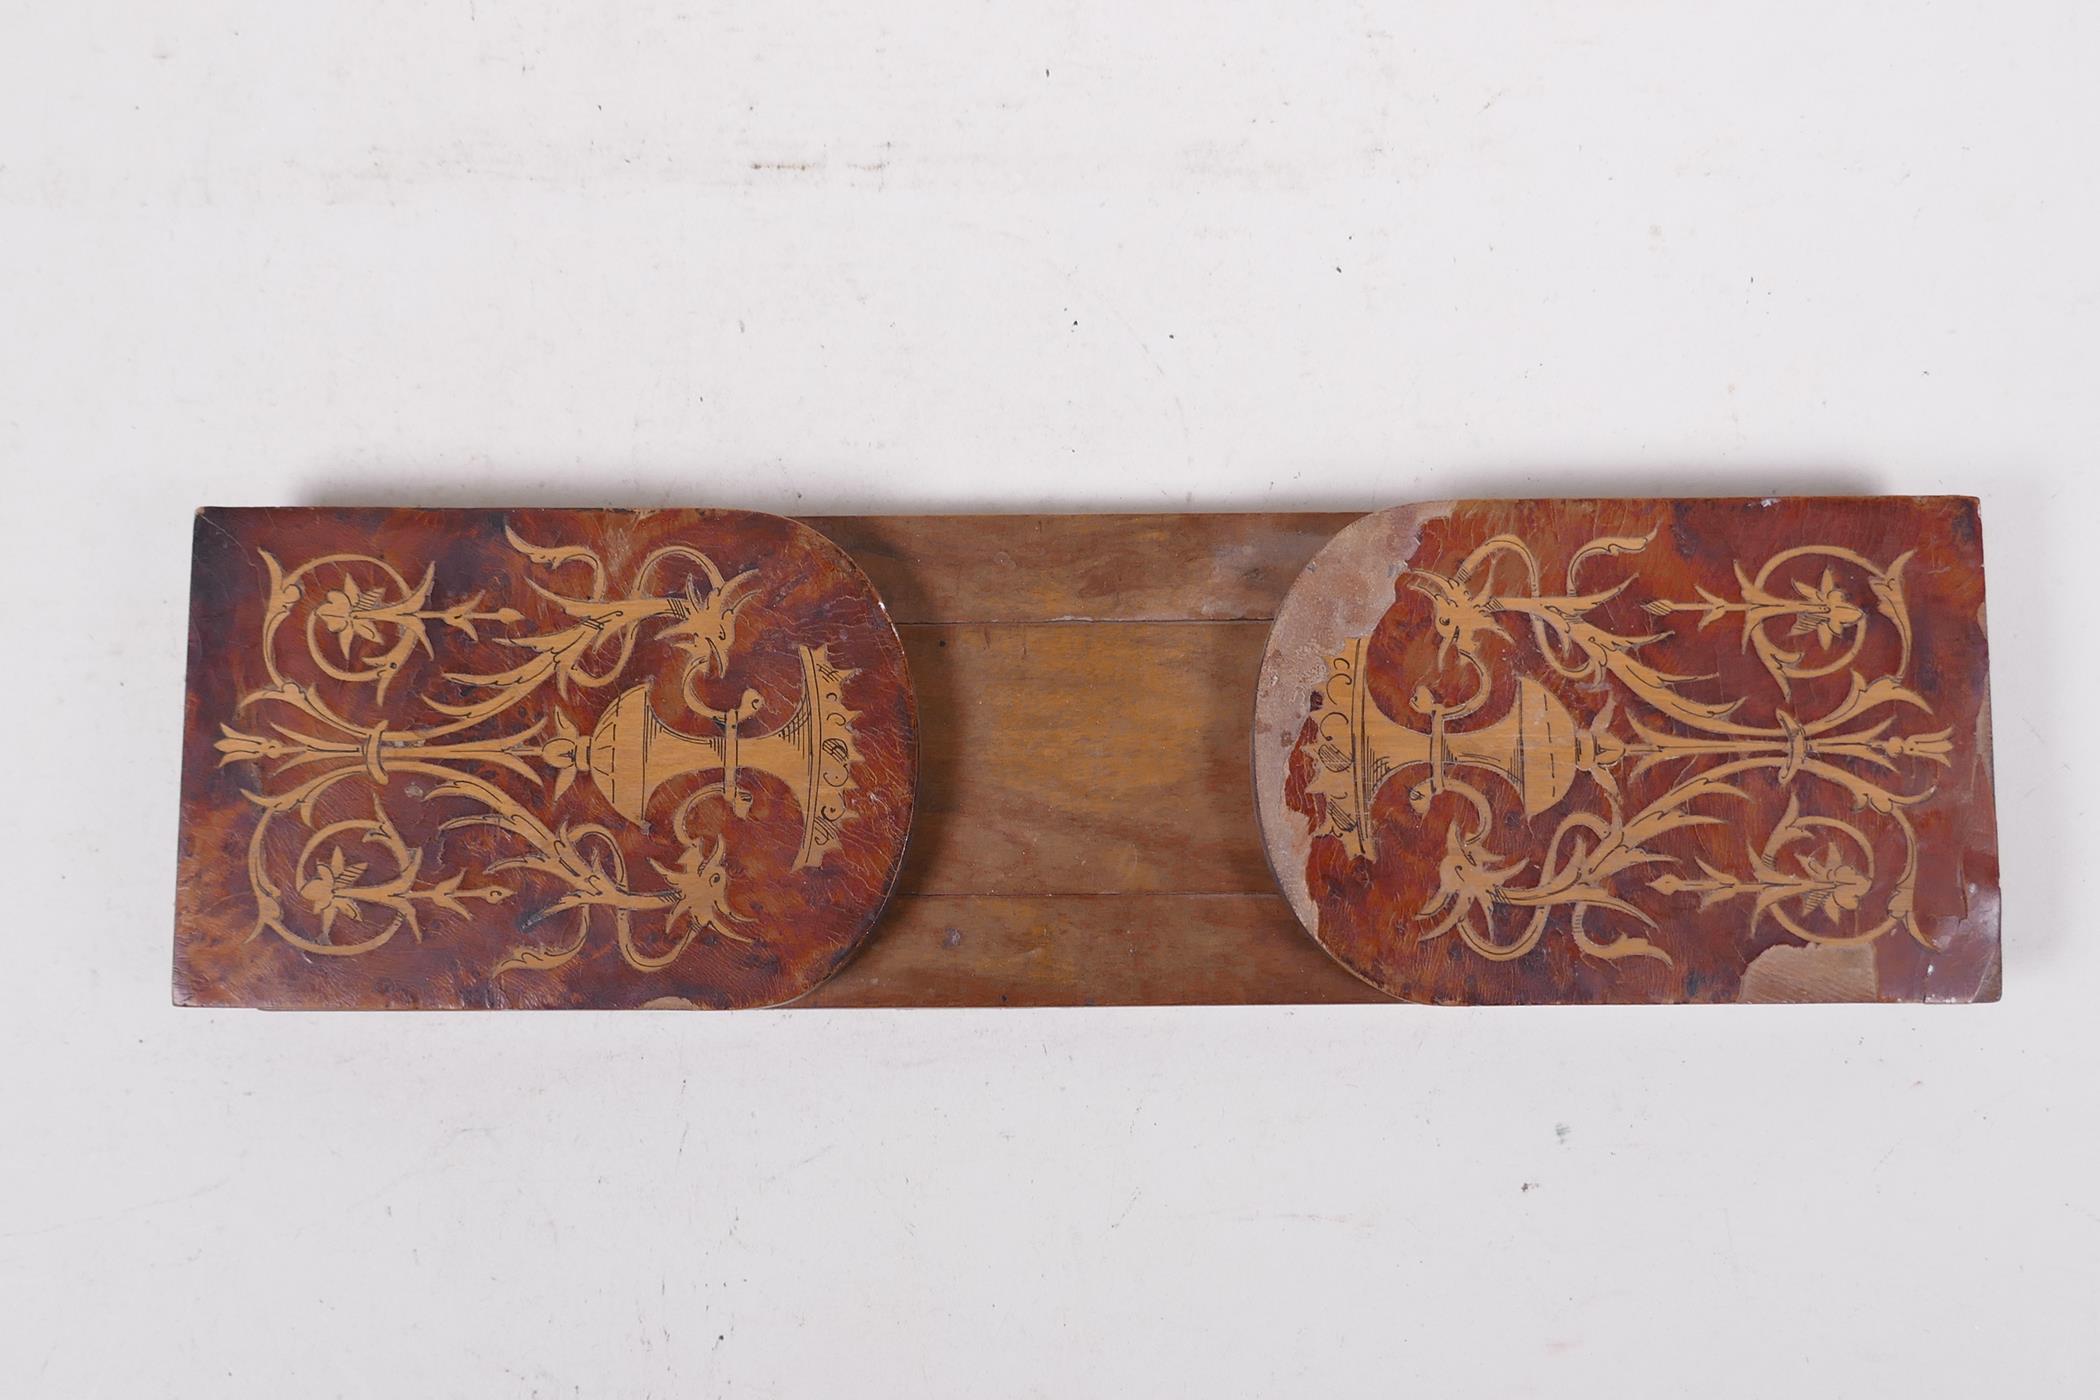 A mid C19th inlaid walnut bookslide, losses to veneer, 17½" long extended - Image 4 of 6